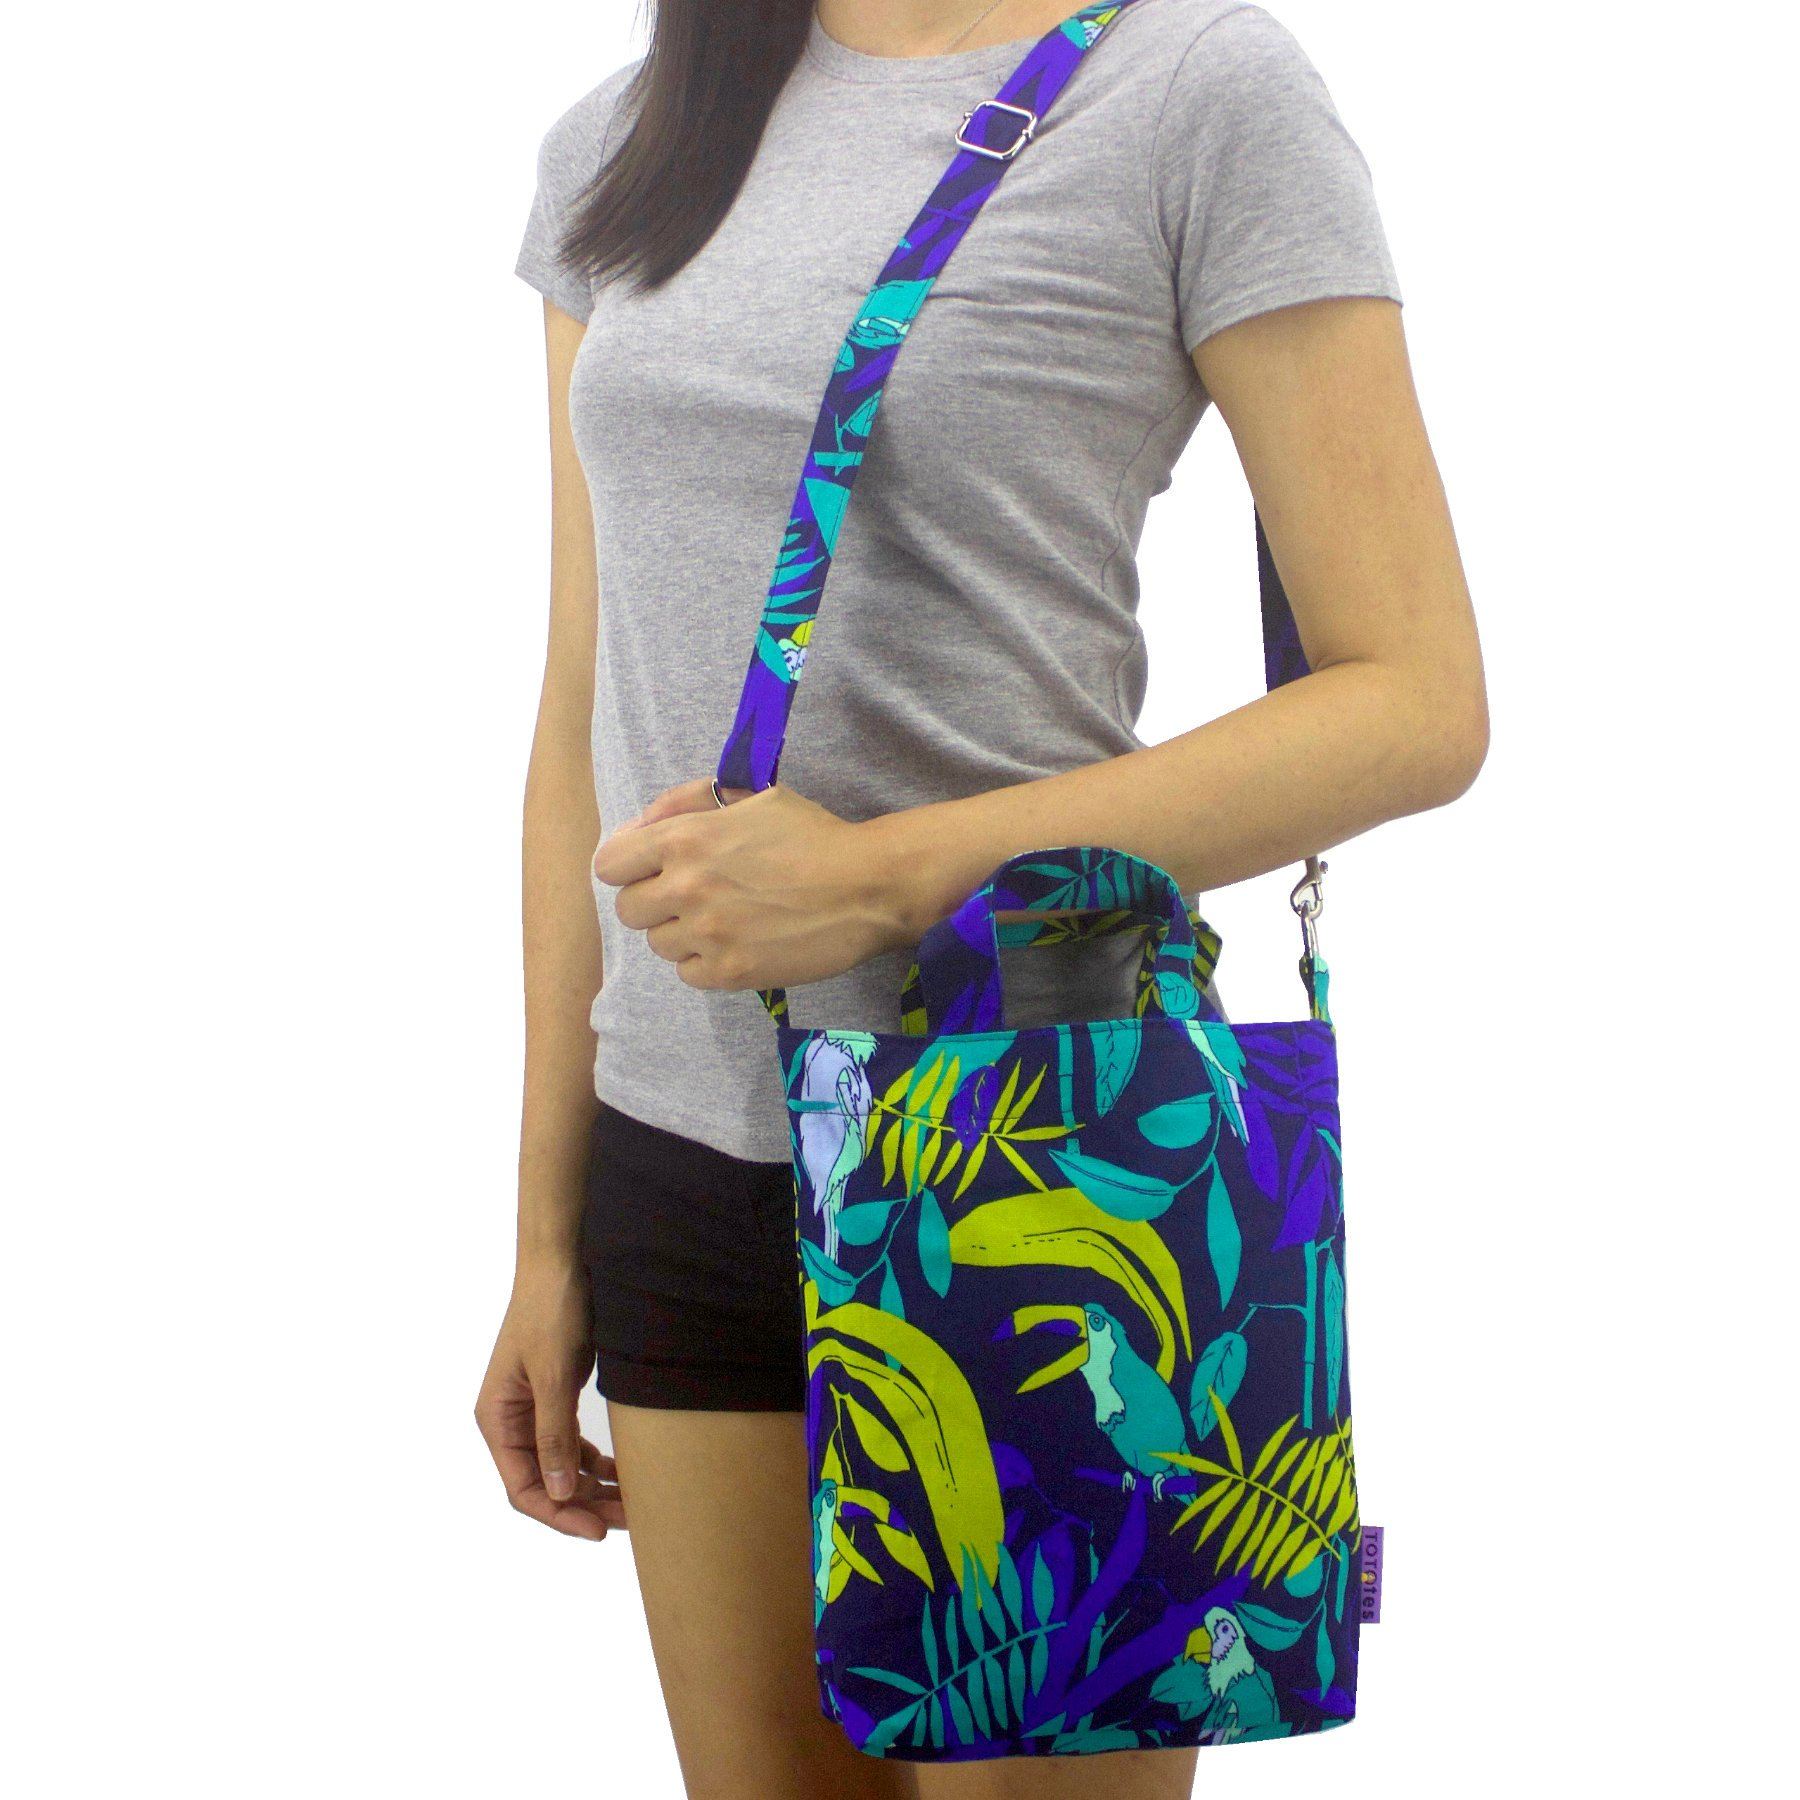 Pack of 2: Small Cotton Crossbody Tote Shoulder Top Handle Bag for Women in Animal Prints